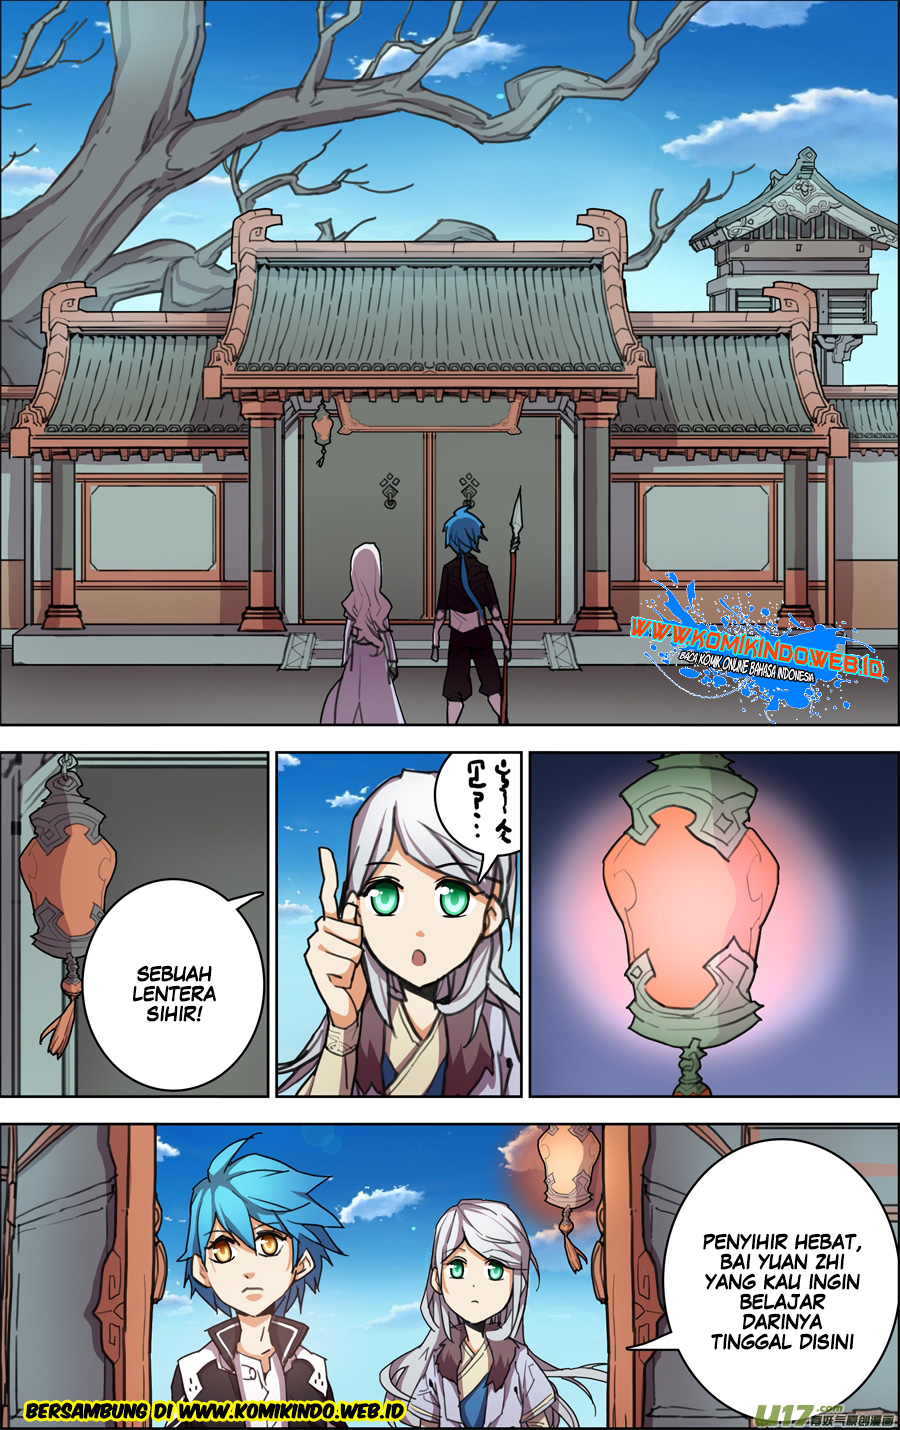 Lord Xue Ying Chapter 4-3